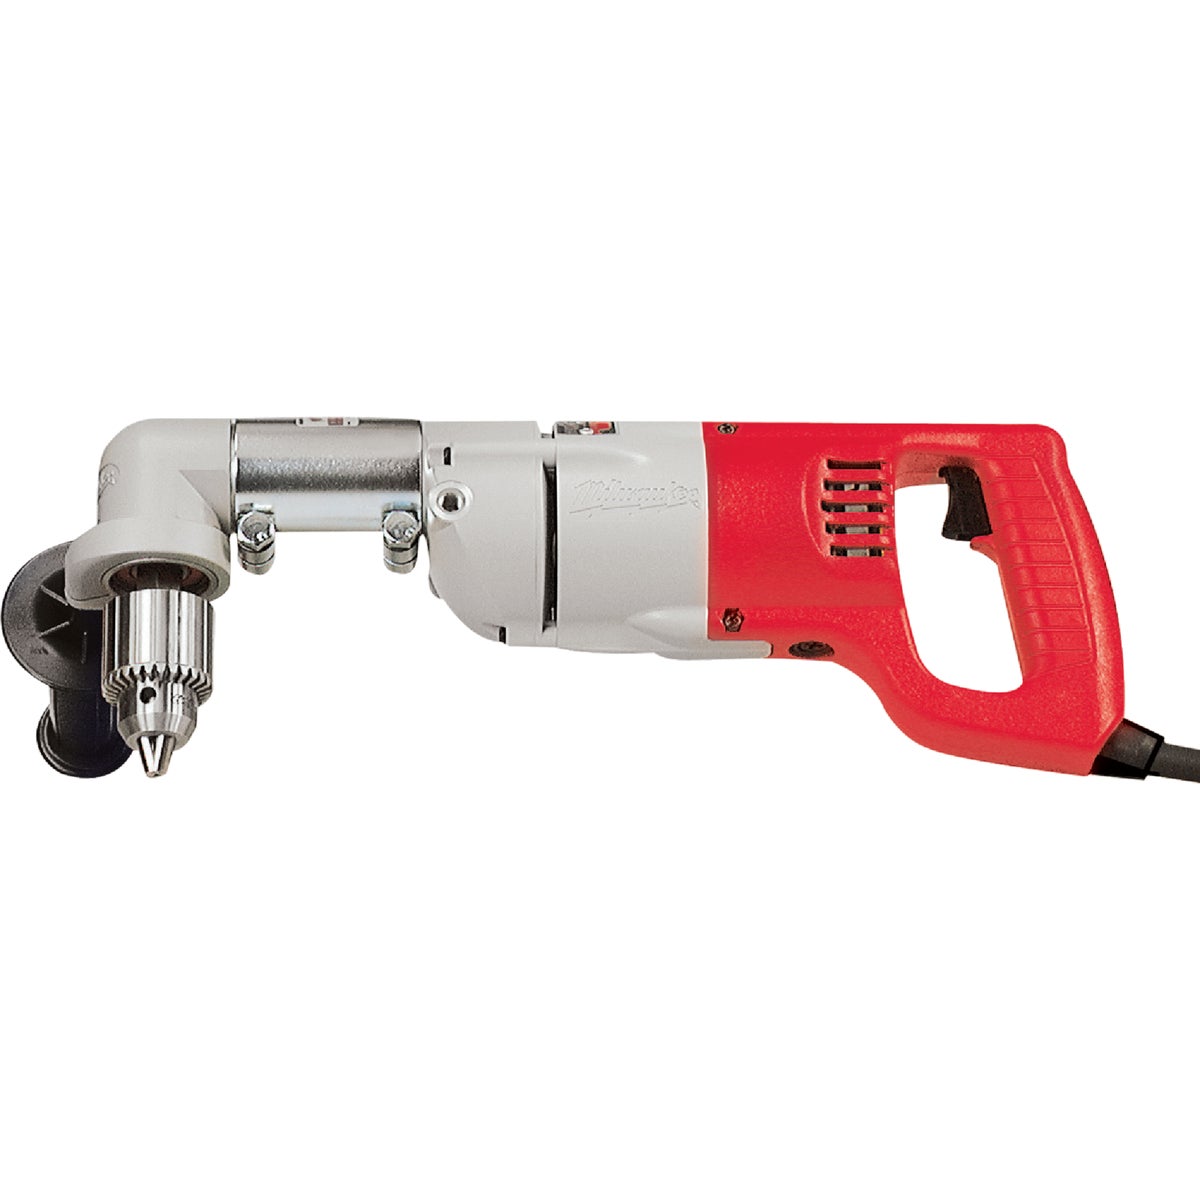 Electric Angle Drill